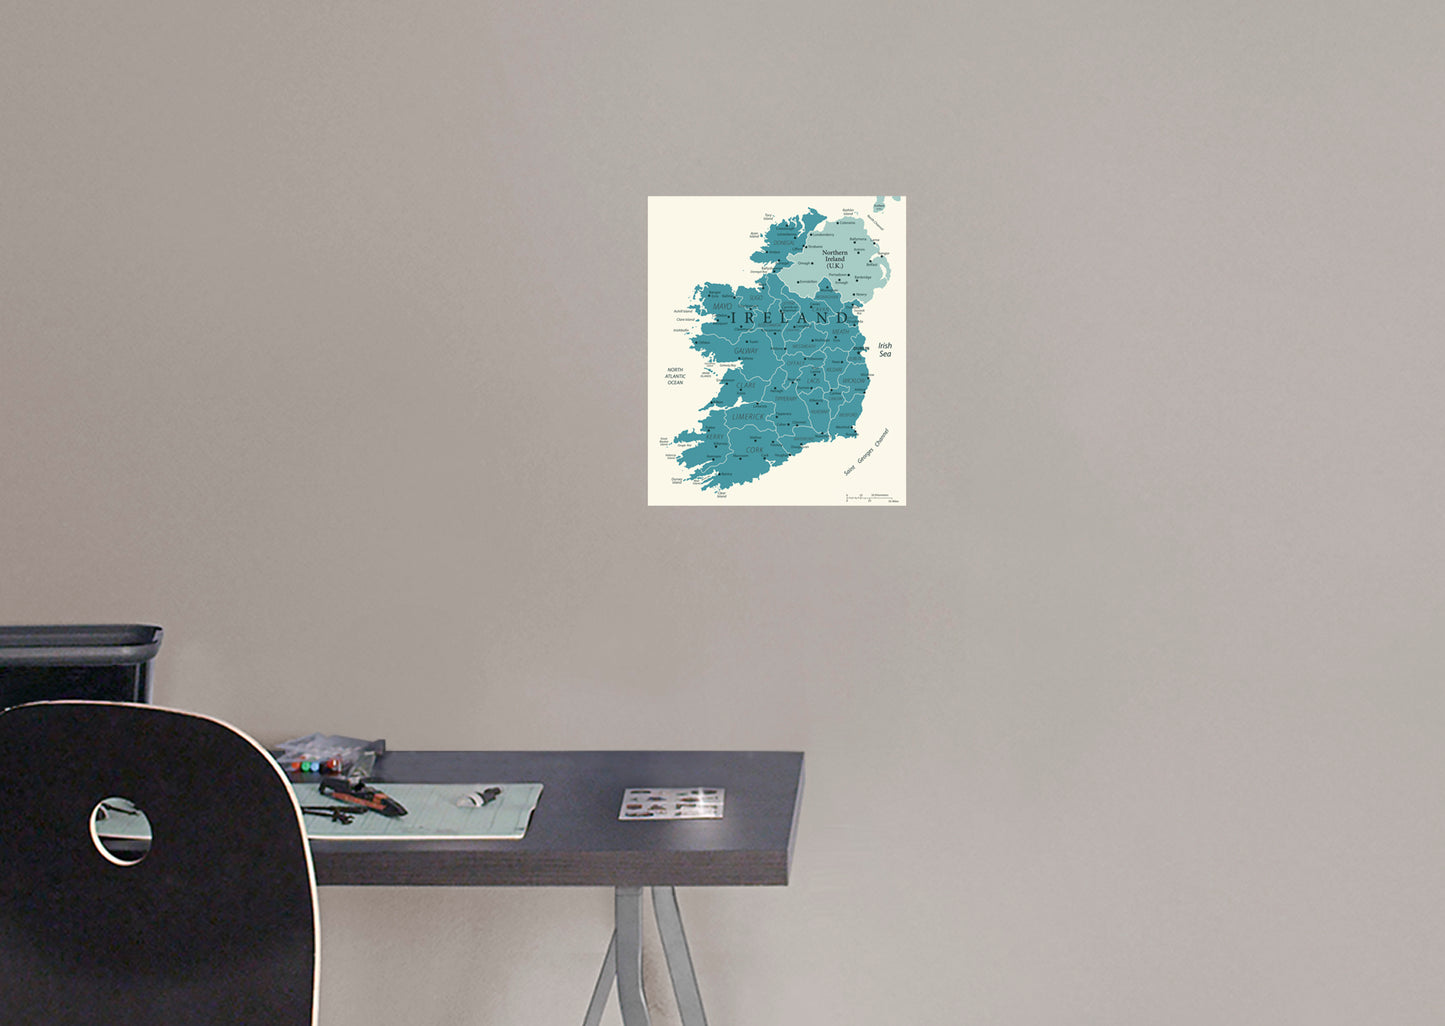 Maps of Europe: Ireland Mural        -   Removable Wall   Adhesive Decal